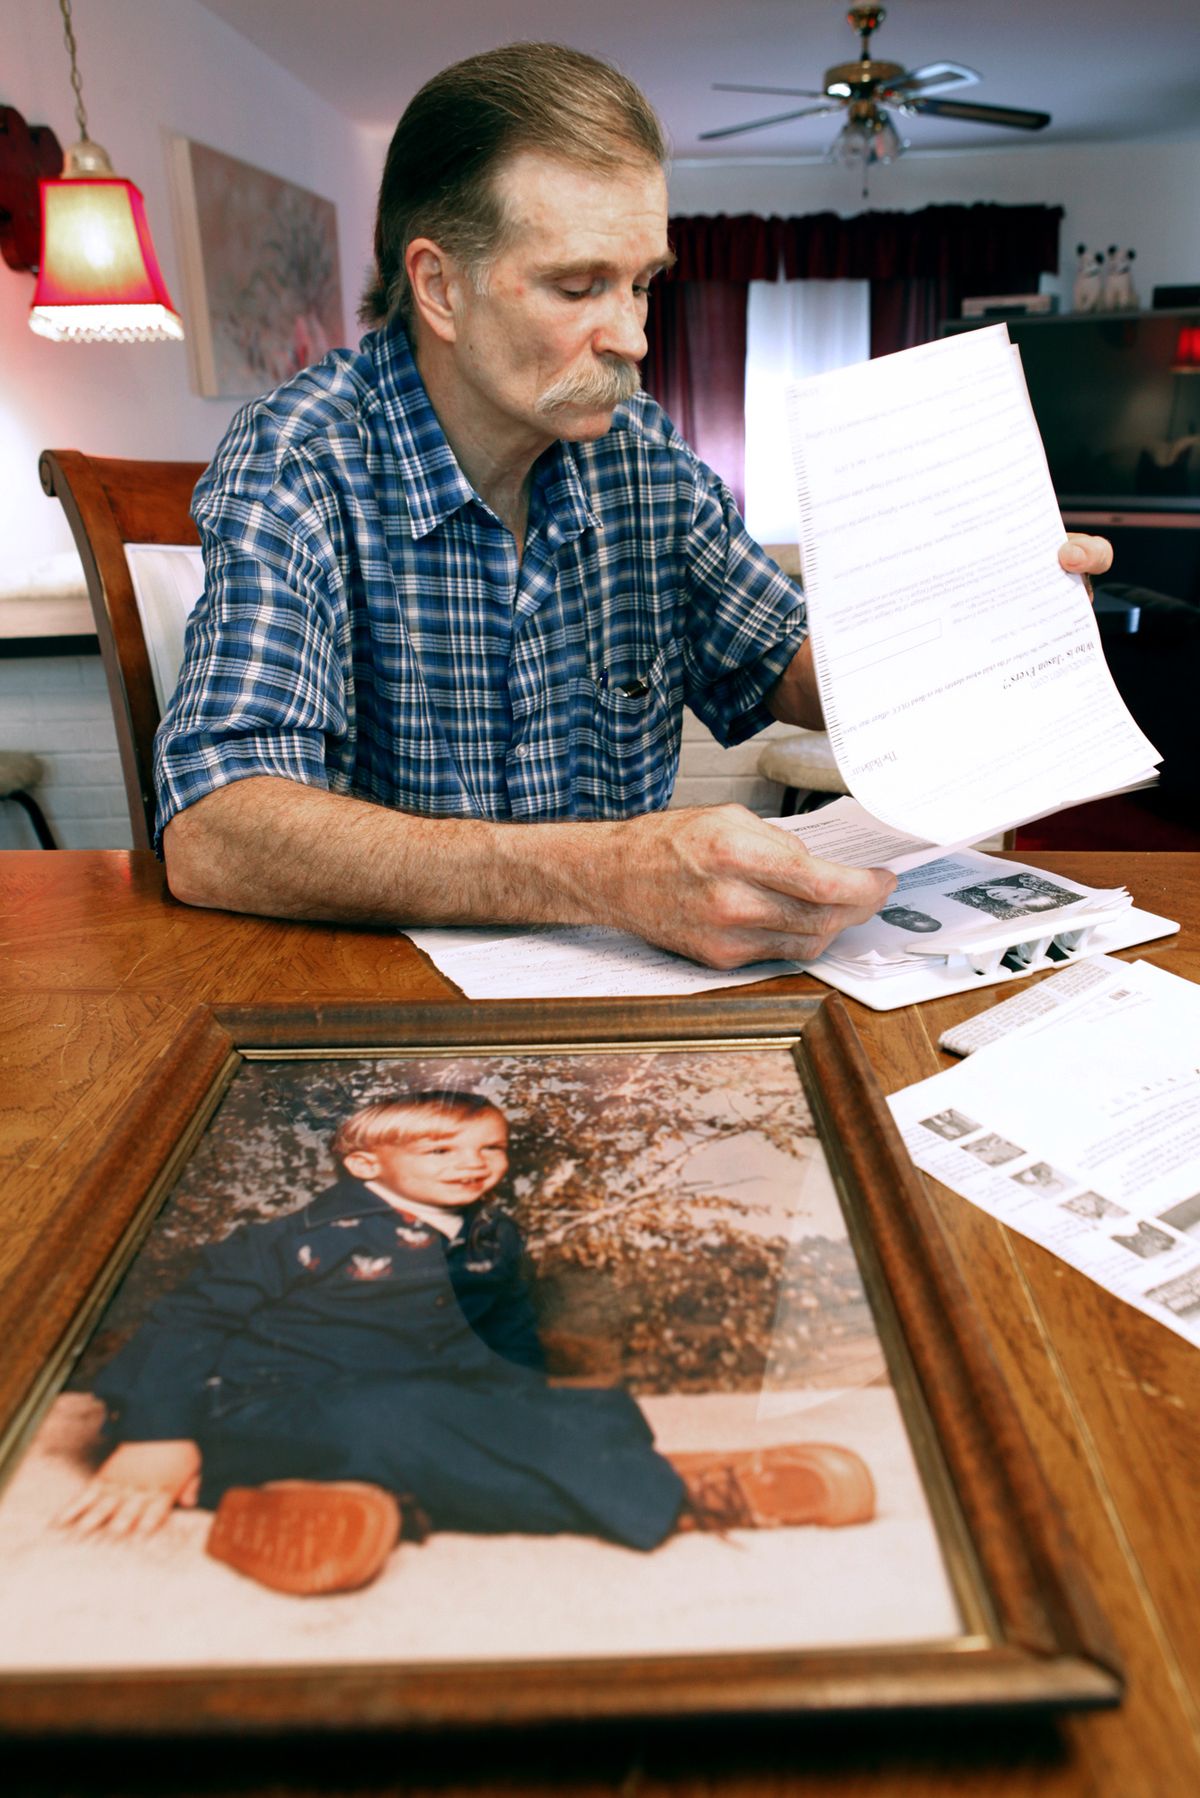 Bob Evers sits behind a photo of his son, kidnap/murder victim Jason Evers, on May 3 at his home in Harrison, Ohio.  A man who was using Jason Evers’ identity in Oregon has been identified as Doitchin Krastev, a native of Bulgaria who attended high school and college in the United States. Cincinnati Enquirer (Flenn Hartong Cincinnati Enquirer)